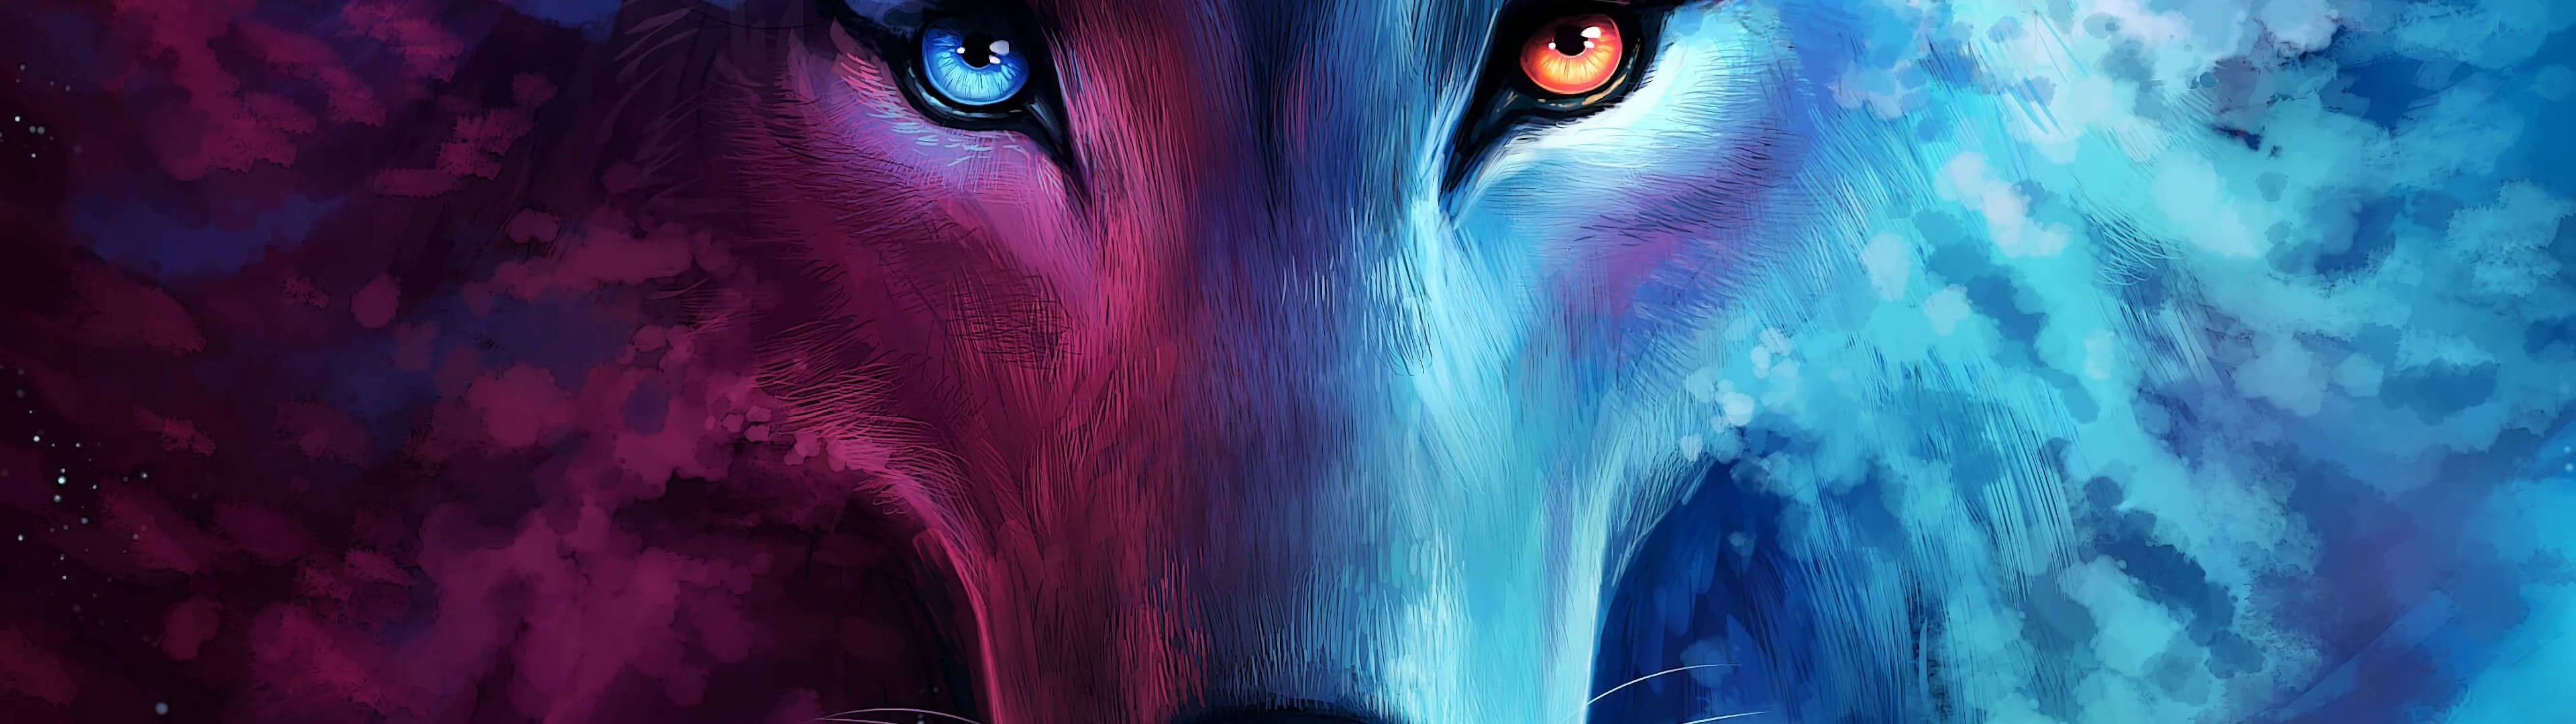 3840x1080 4k Colorful Wolf Wallpaper